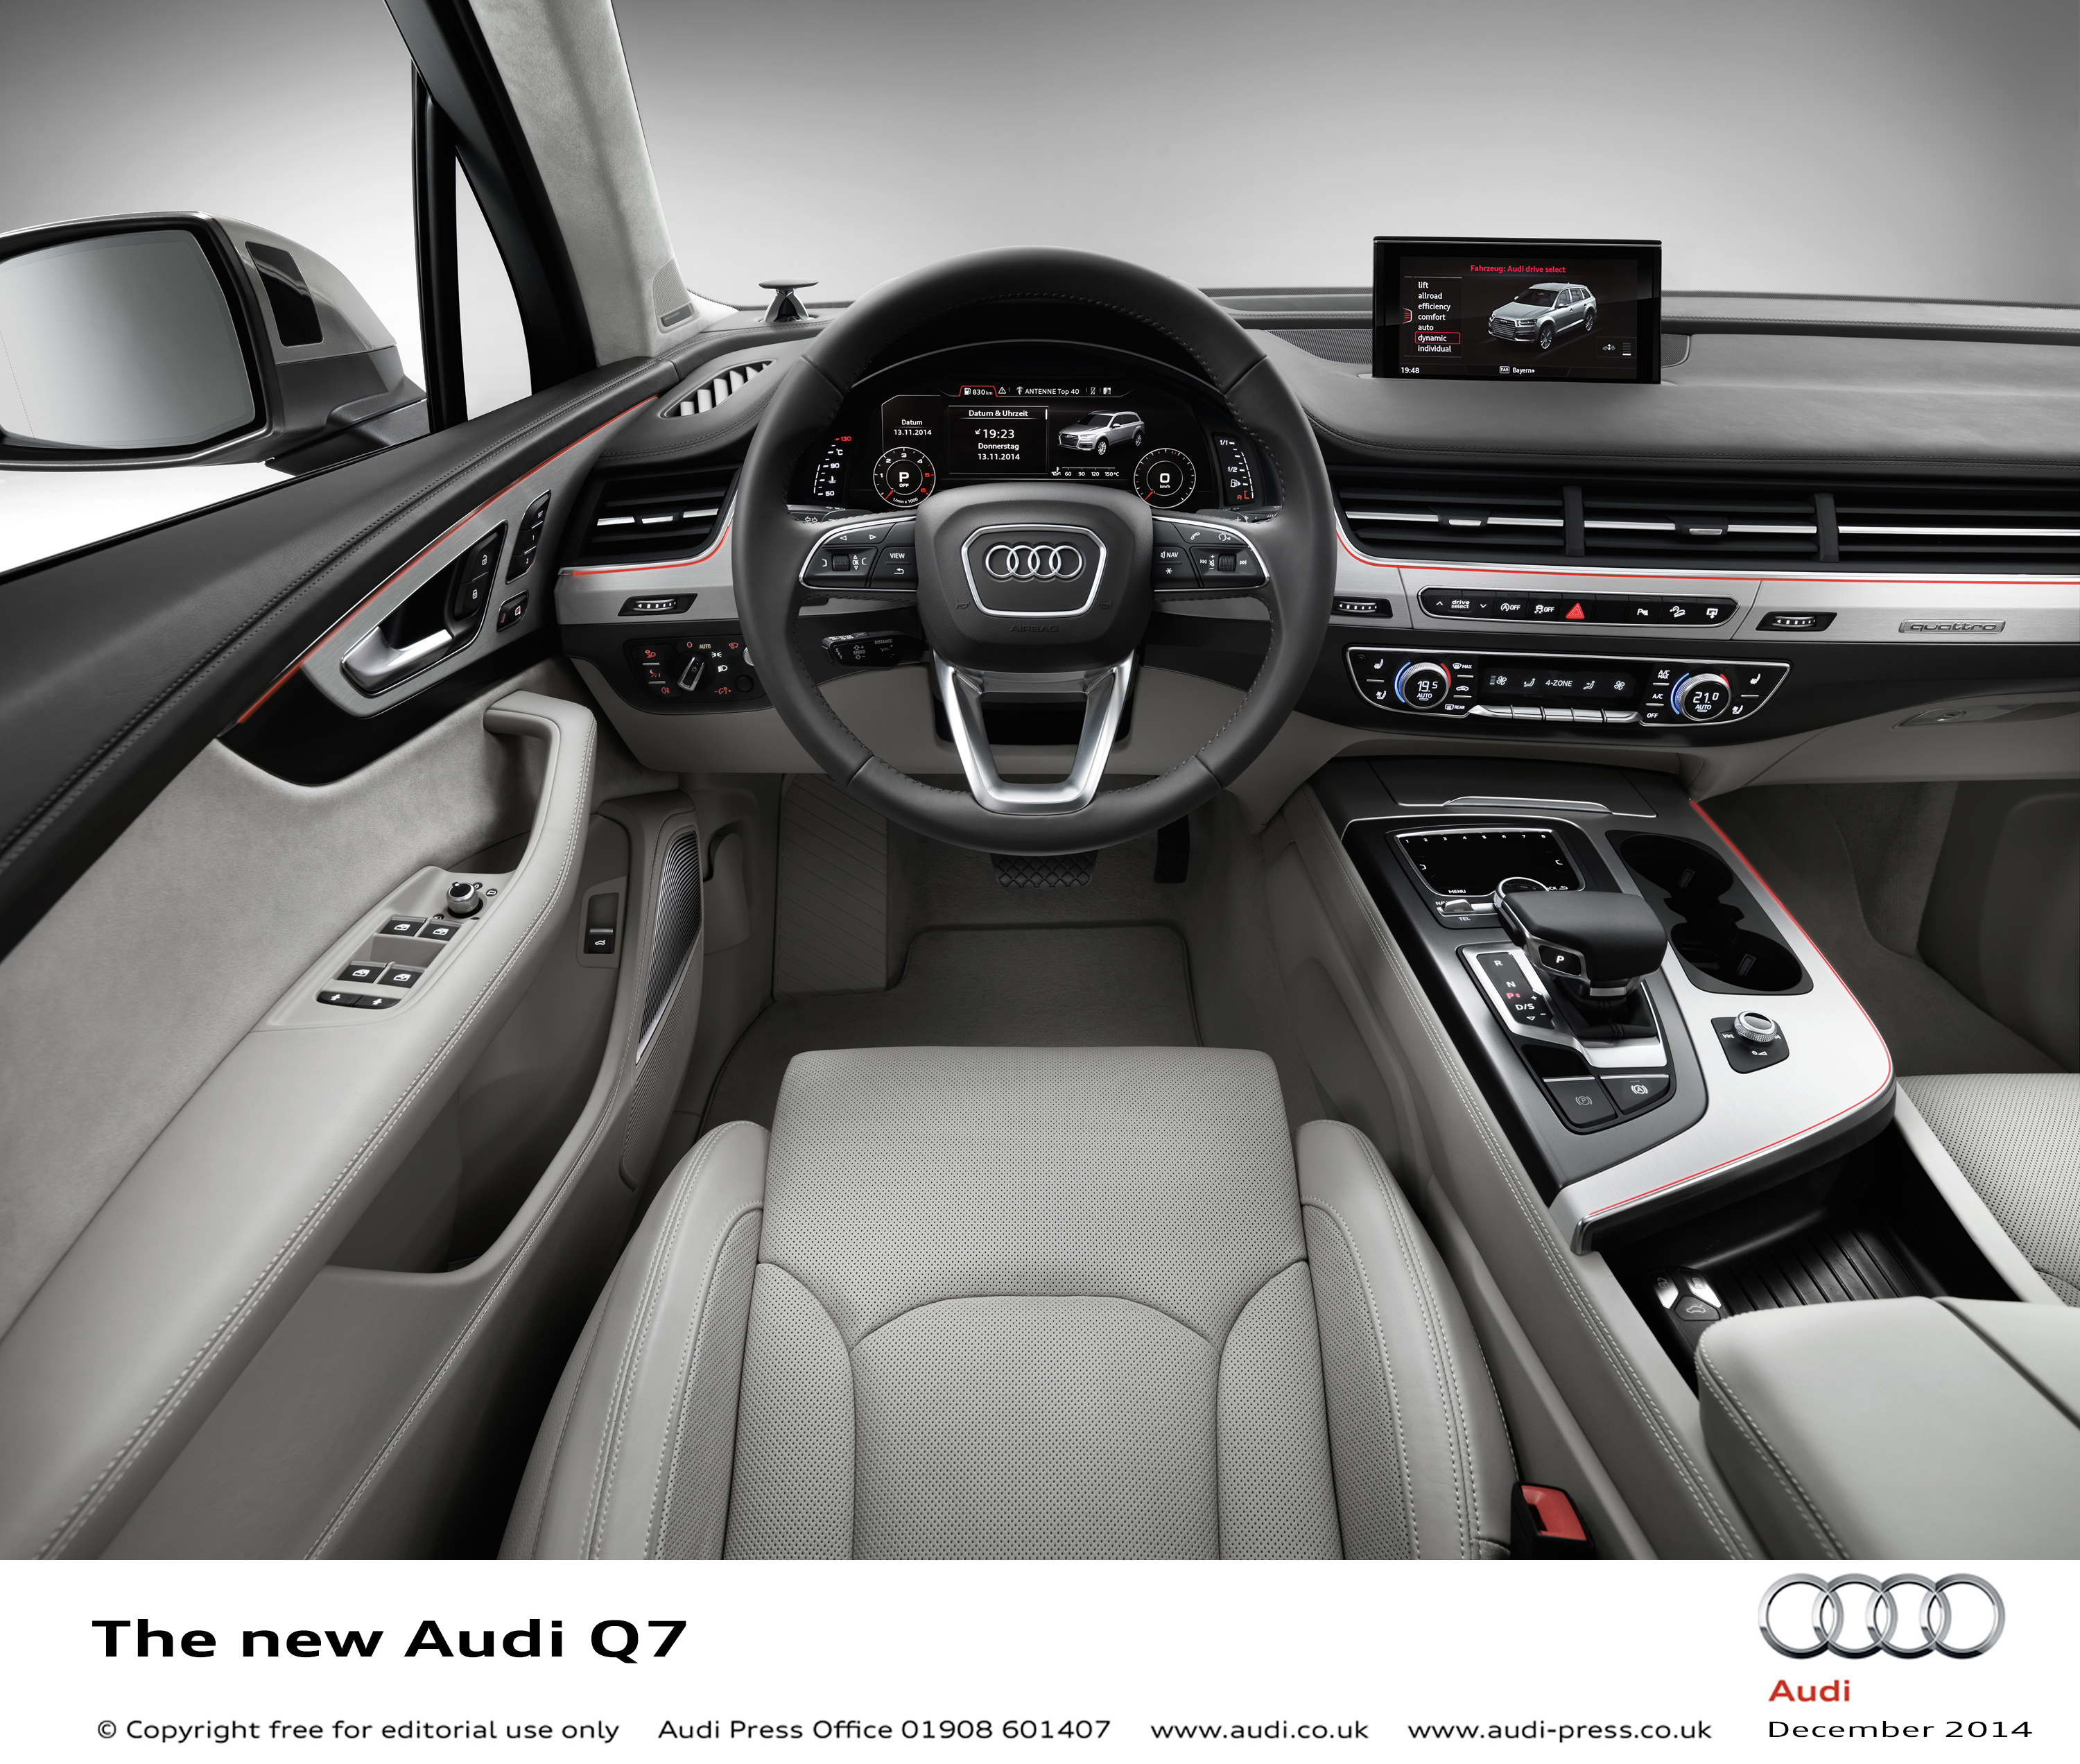 New Audi Q7 to feature cutting edge telematics connectivity